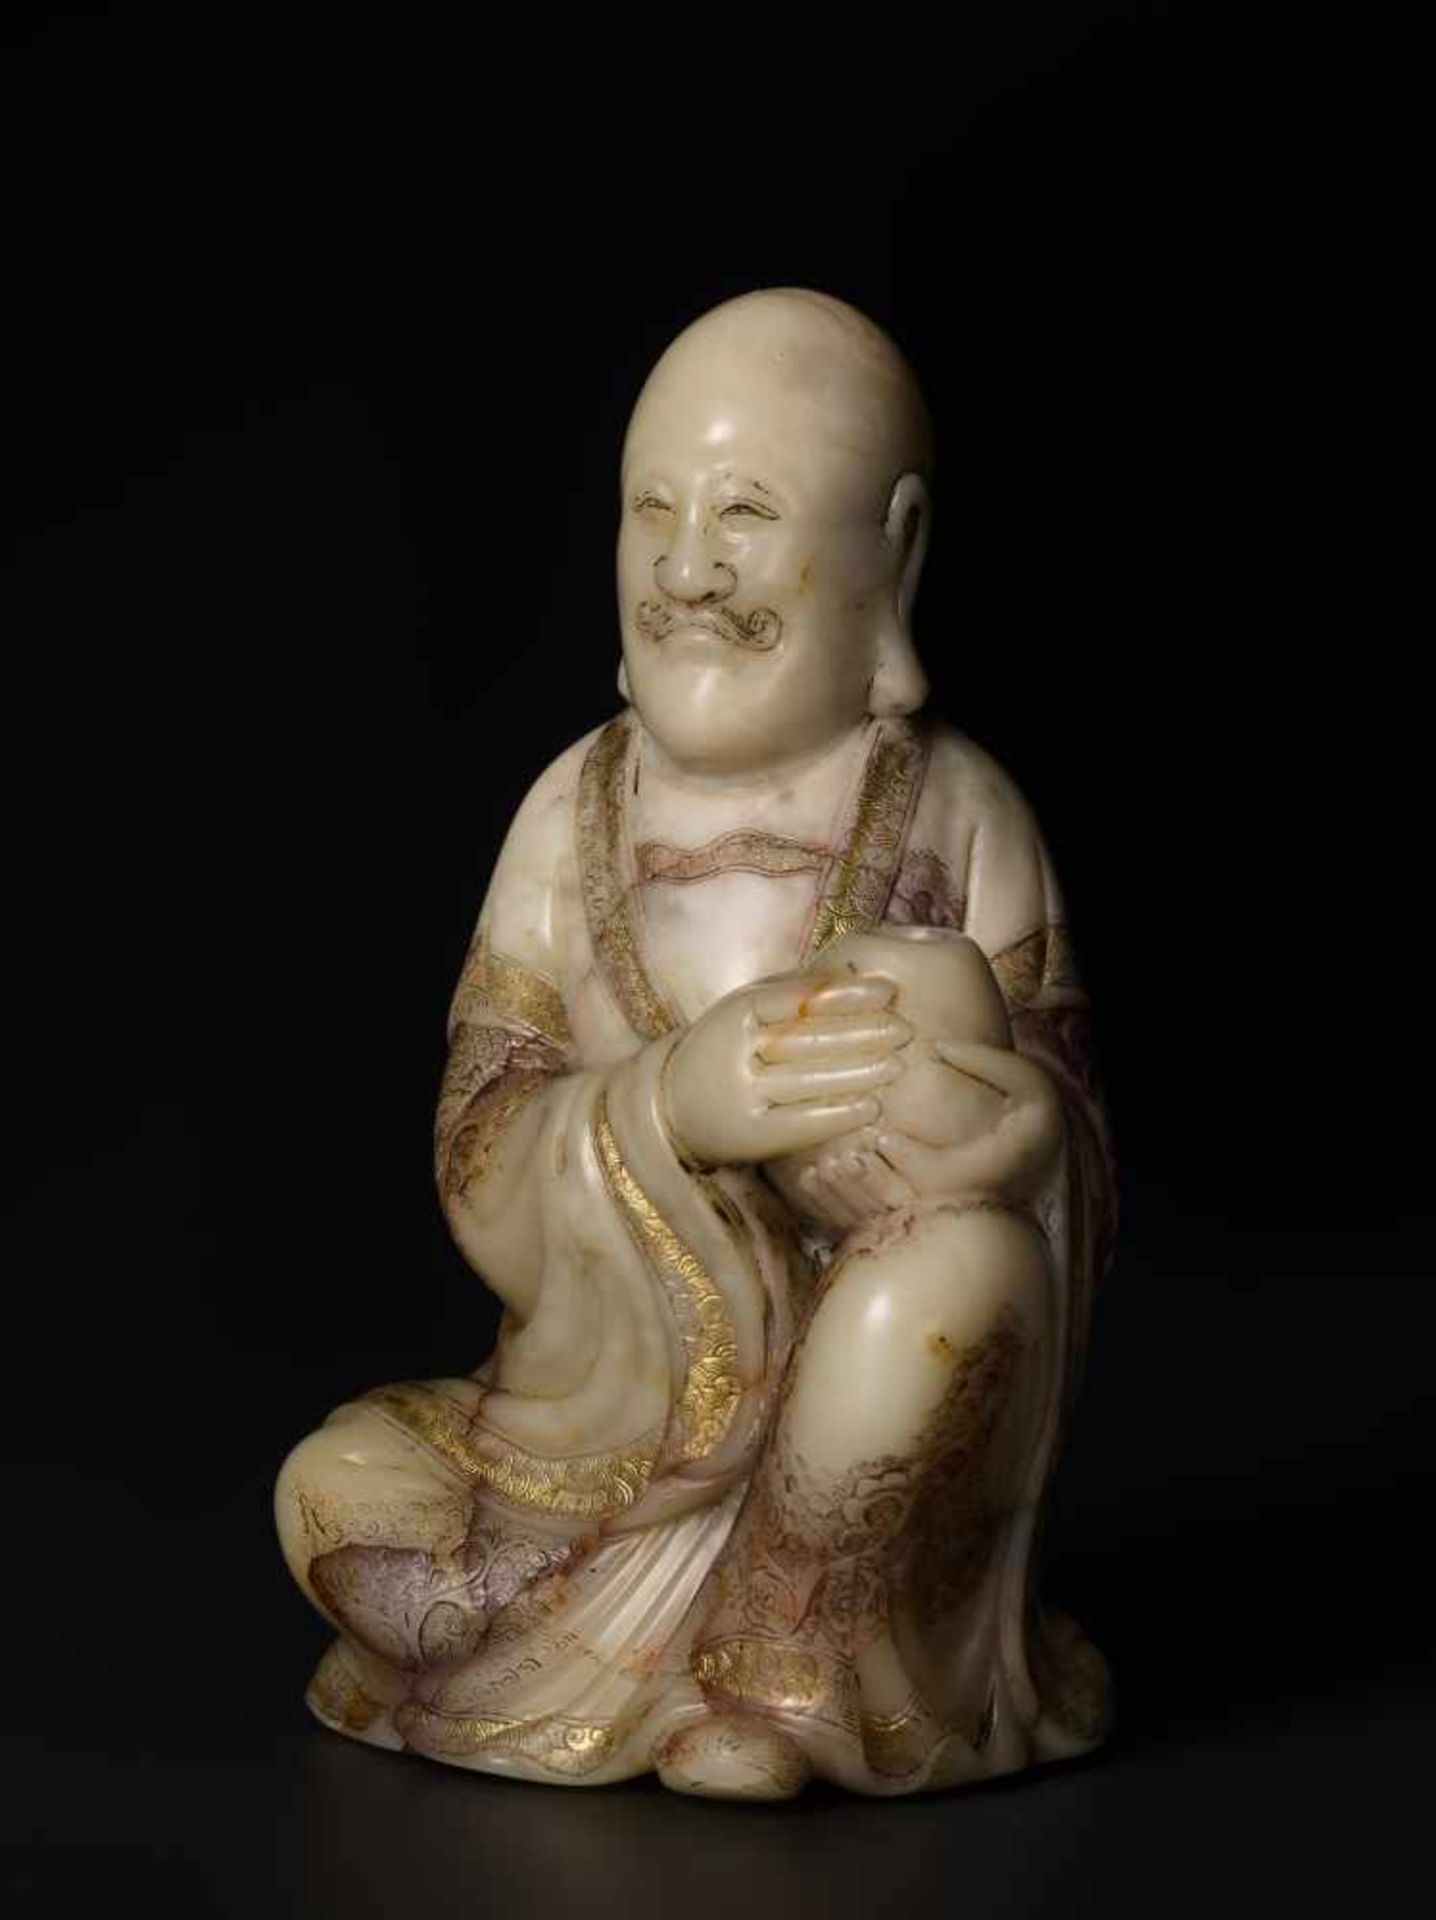 A FINE 17th / 18th CENTURY SOAPSTONE FIGURE OF A LUOHAN Soapstone of a creamy-beige color with